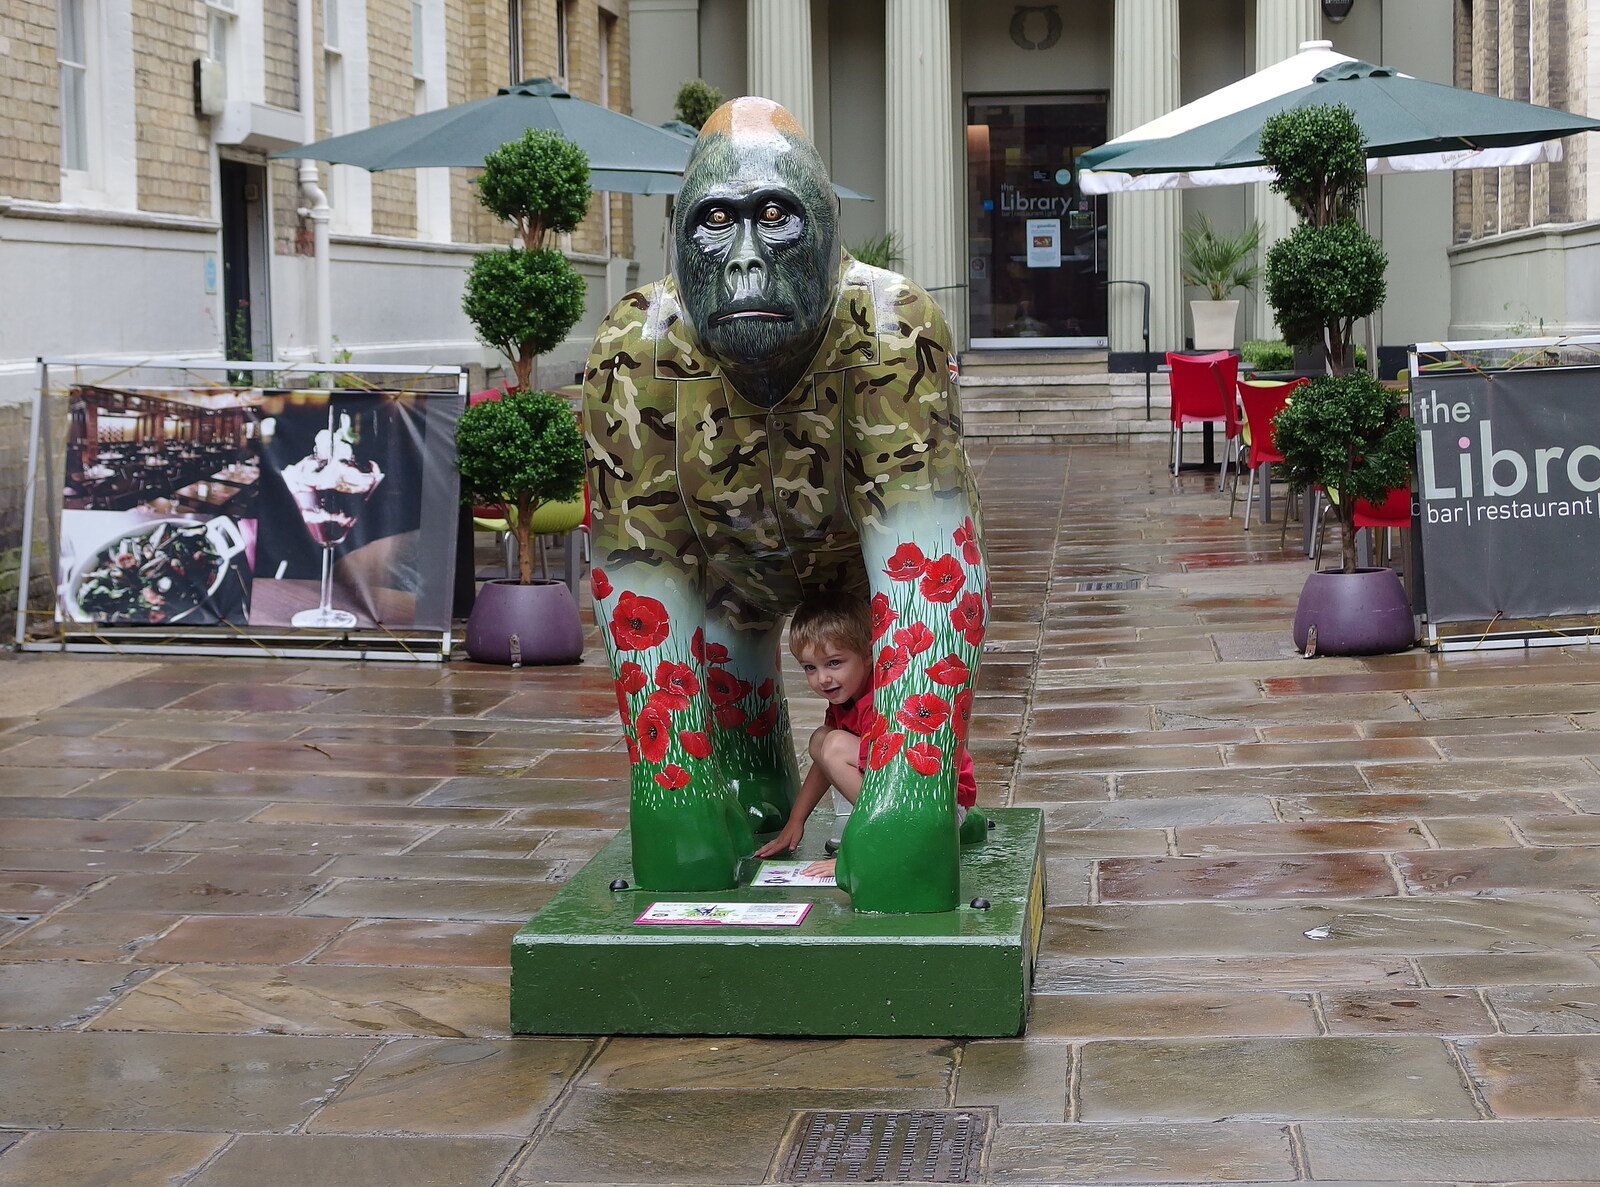 Another gorilla up near Gaol Hill from The Gorillas of Norwich, Norfolk - 5th August 2013